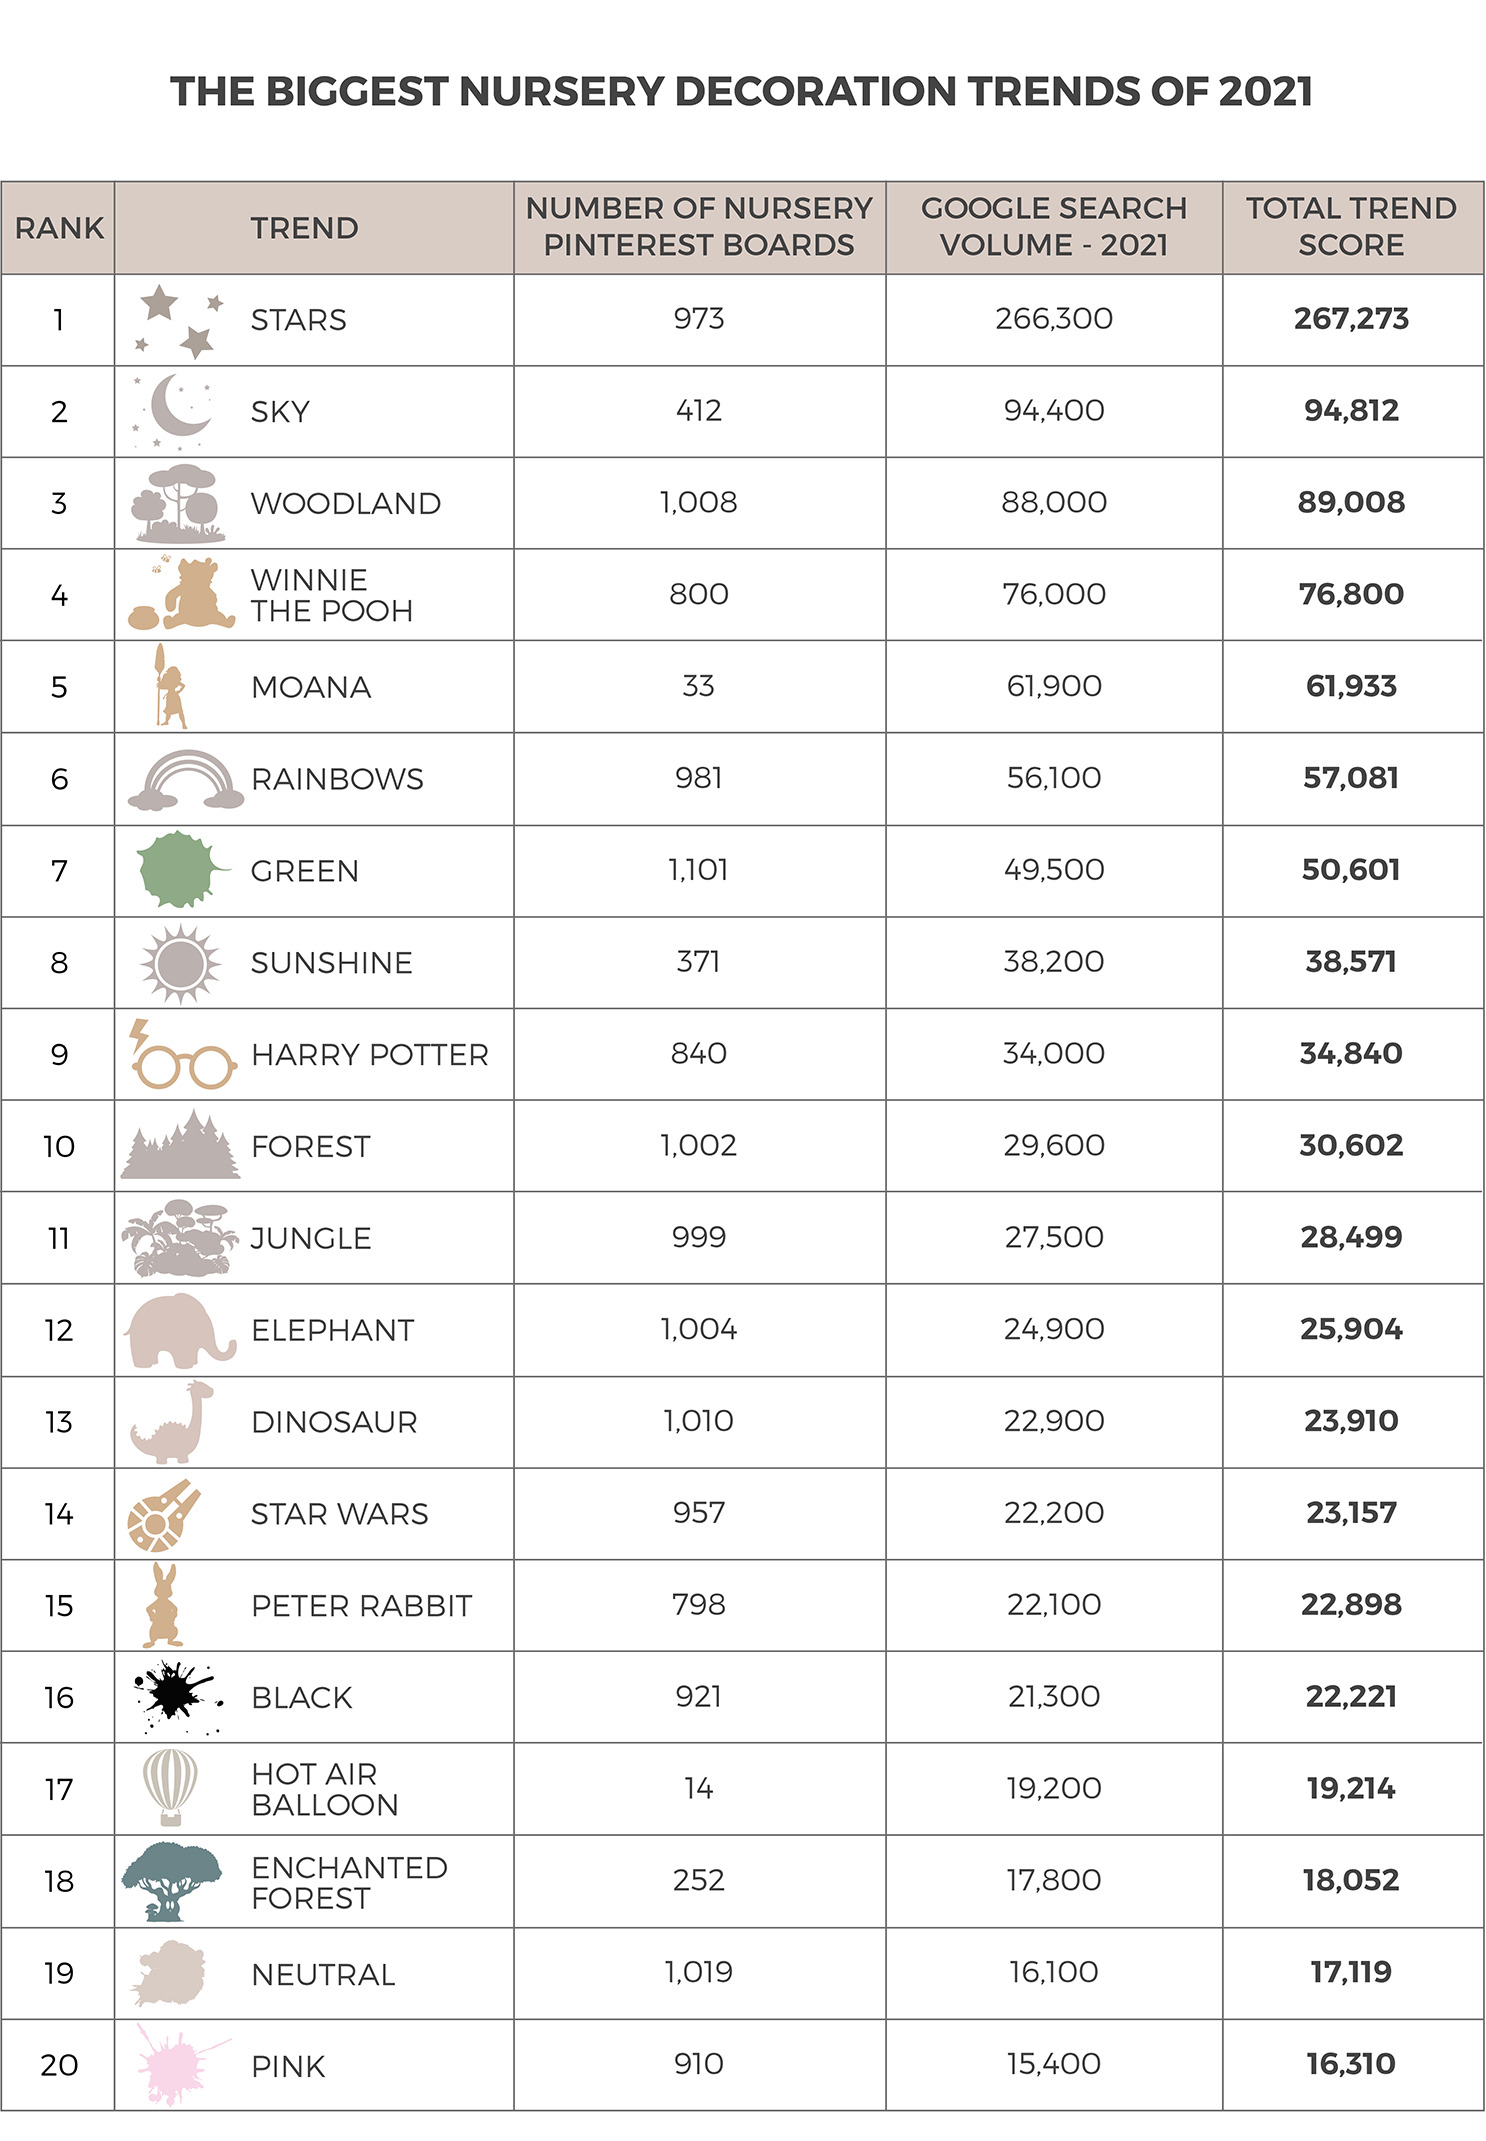 Table showing the top 20 nursery decoration trends for 2021